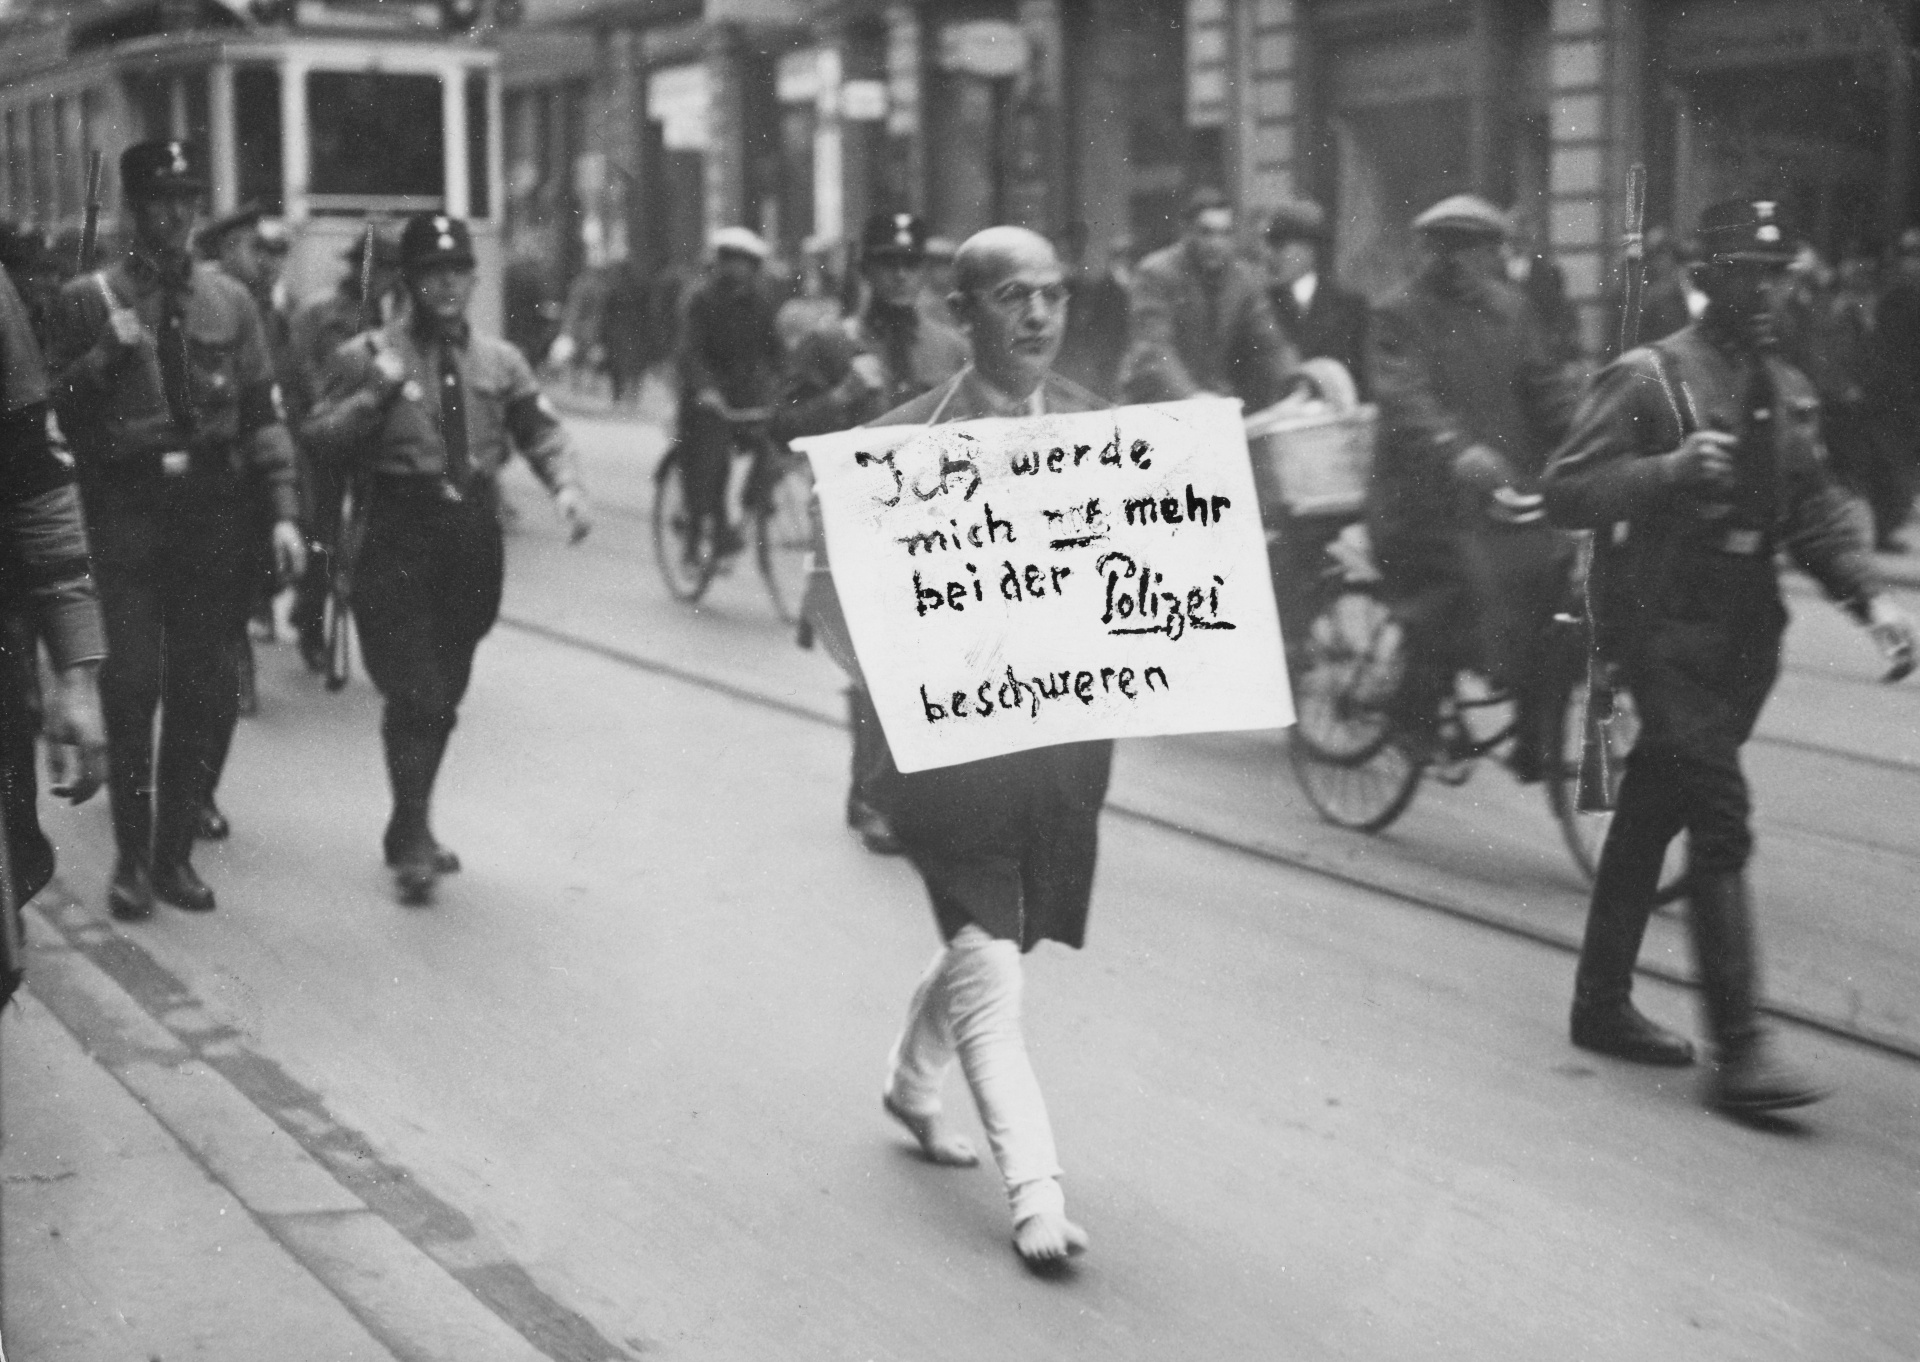 A man walking barefoot along the street with cut-off pants and a sign around his neck saying: “I’ll never complain to the police again.” Behind and beside him are men in uniform and passers-by.